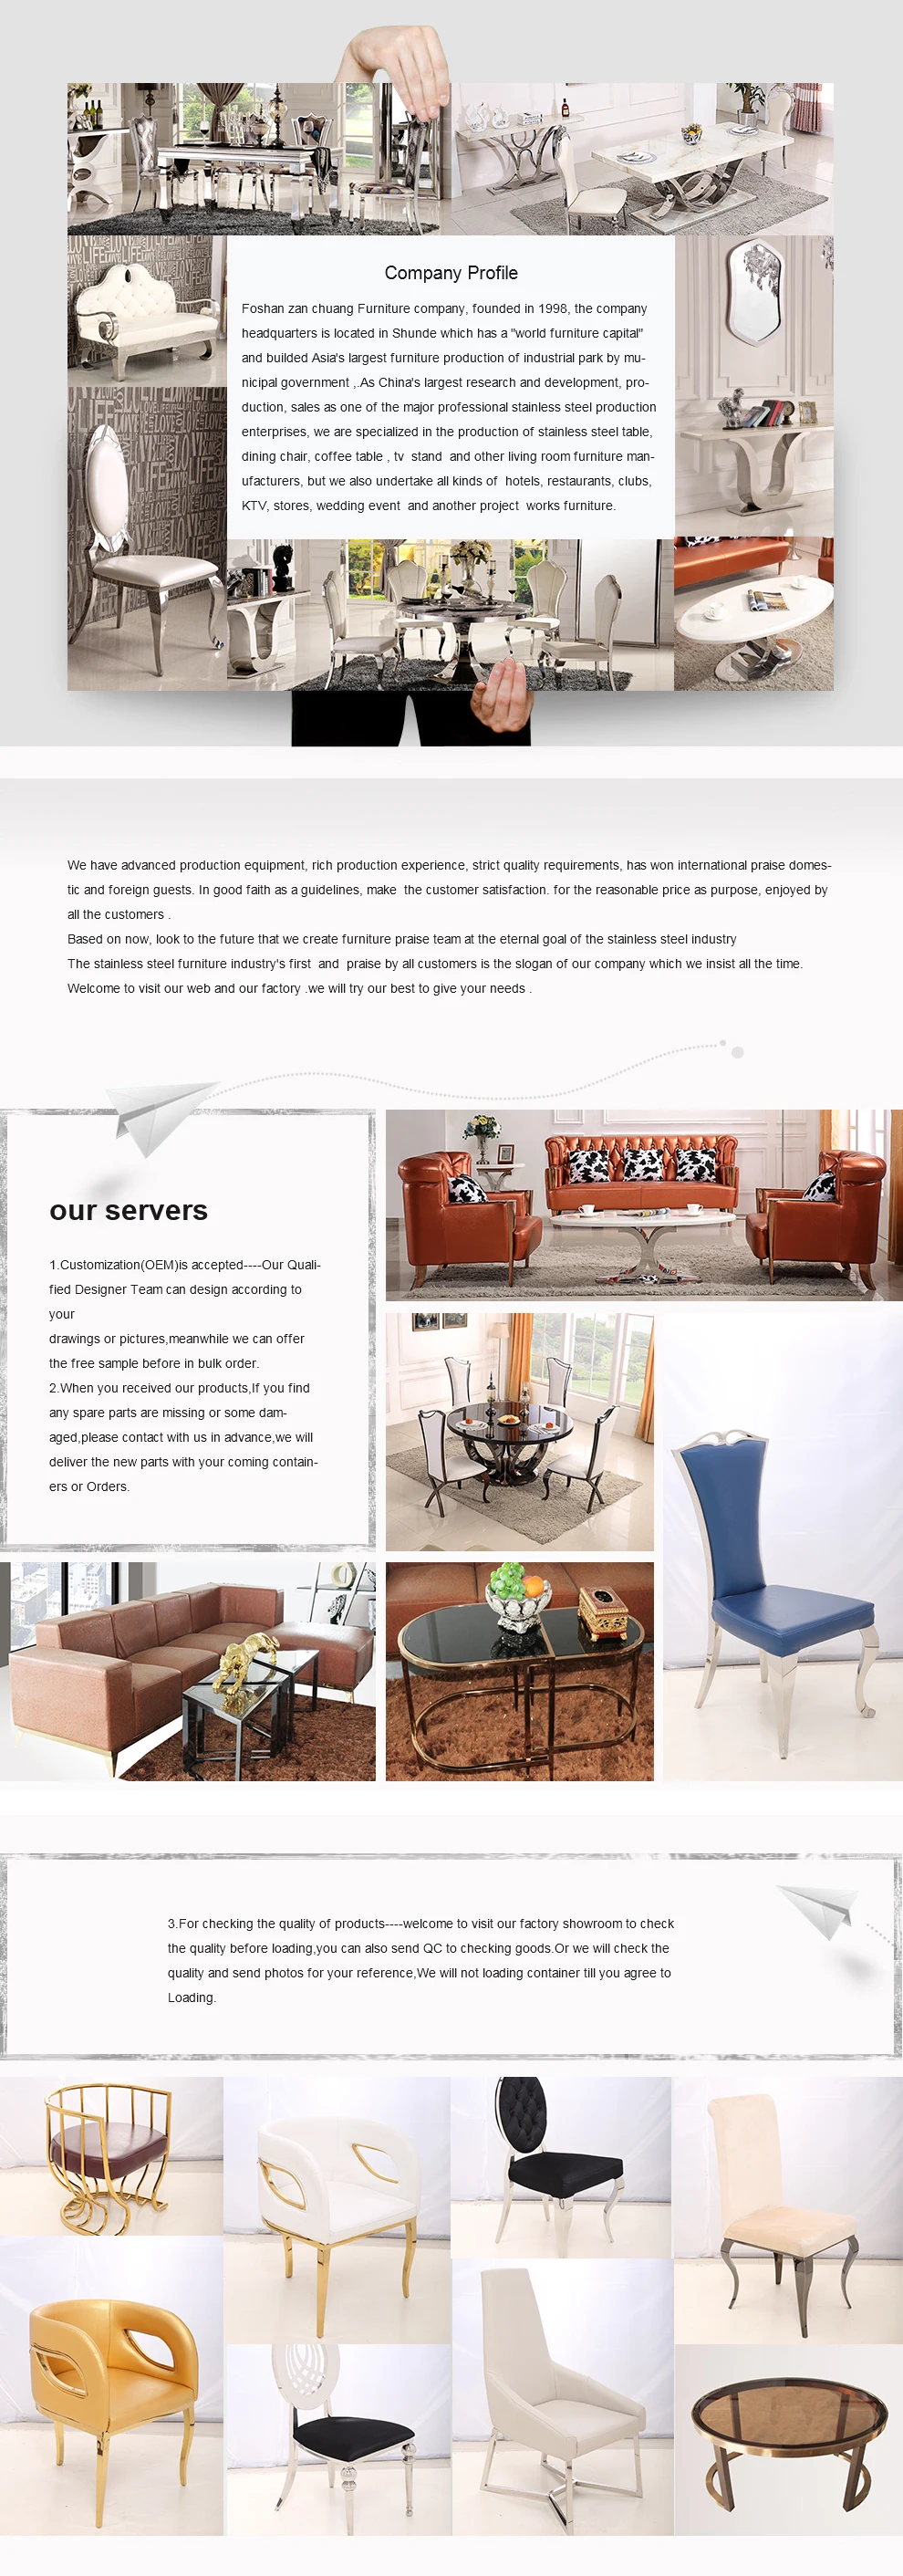 About Us Foshan Zanchuang Furniture Company Limited